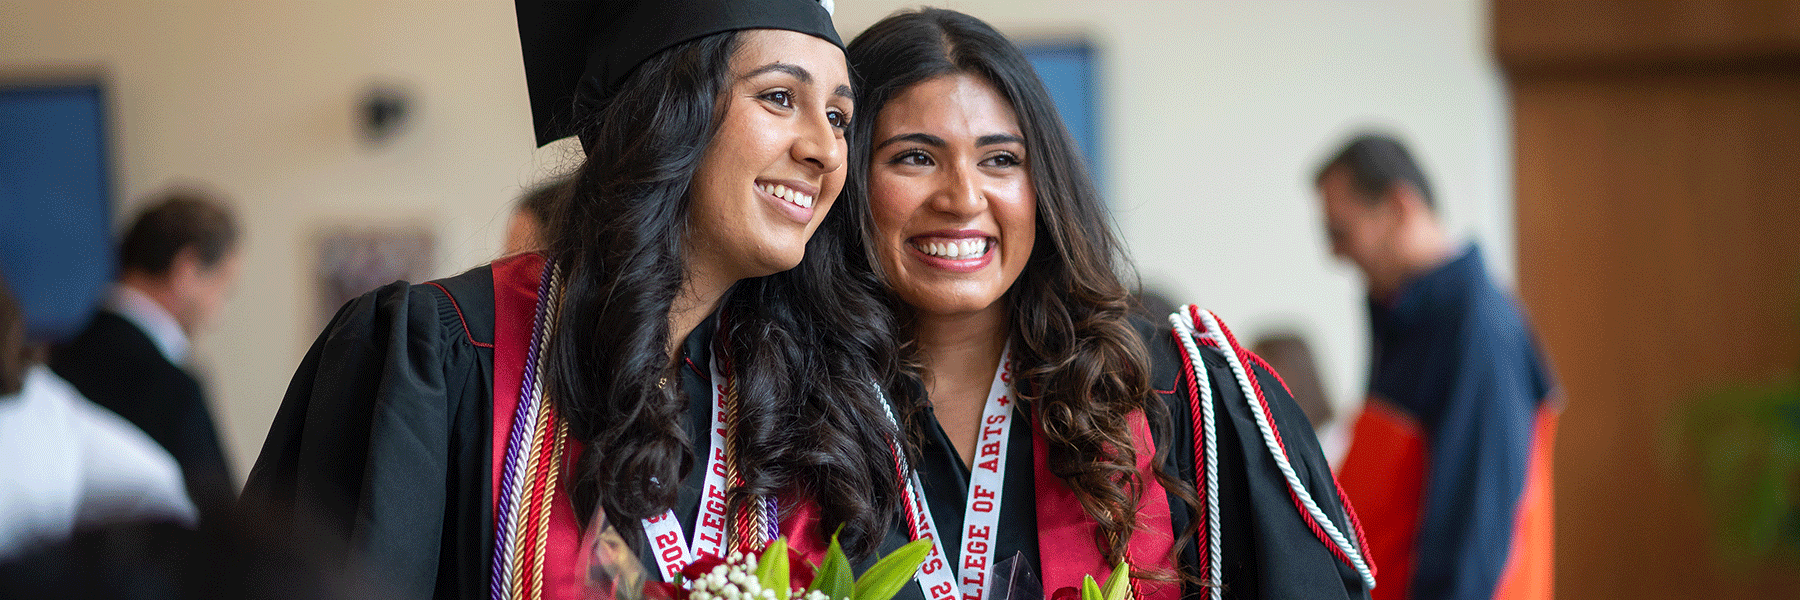 Two female graduates smiling together as they pose for a picture after commencement.